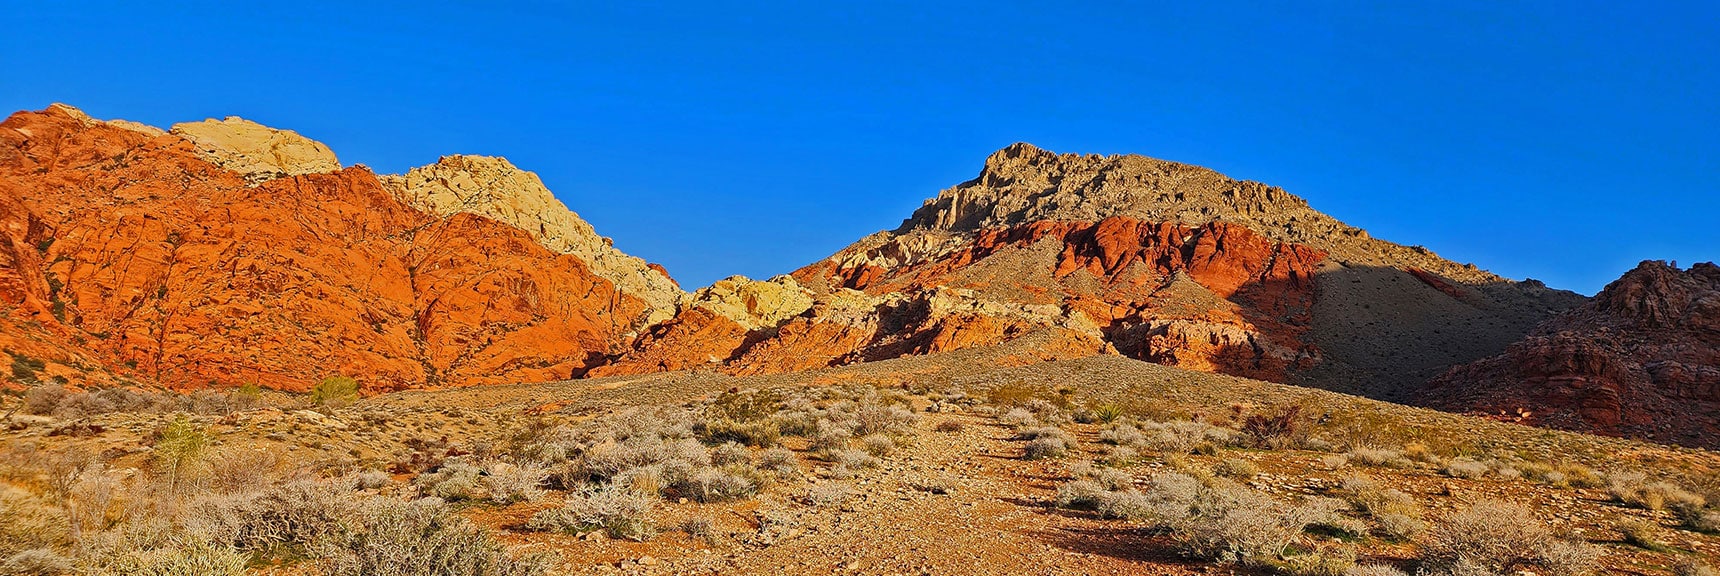 Ash Canyon Passage from Calico Basin to Red Rock Canyon | Ash Canyon to Calico Tanks | Calico Basin and Red Rock Canyon, Nevada | David Smith | Las Vegas Area Trails